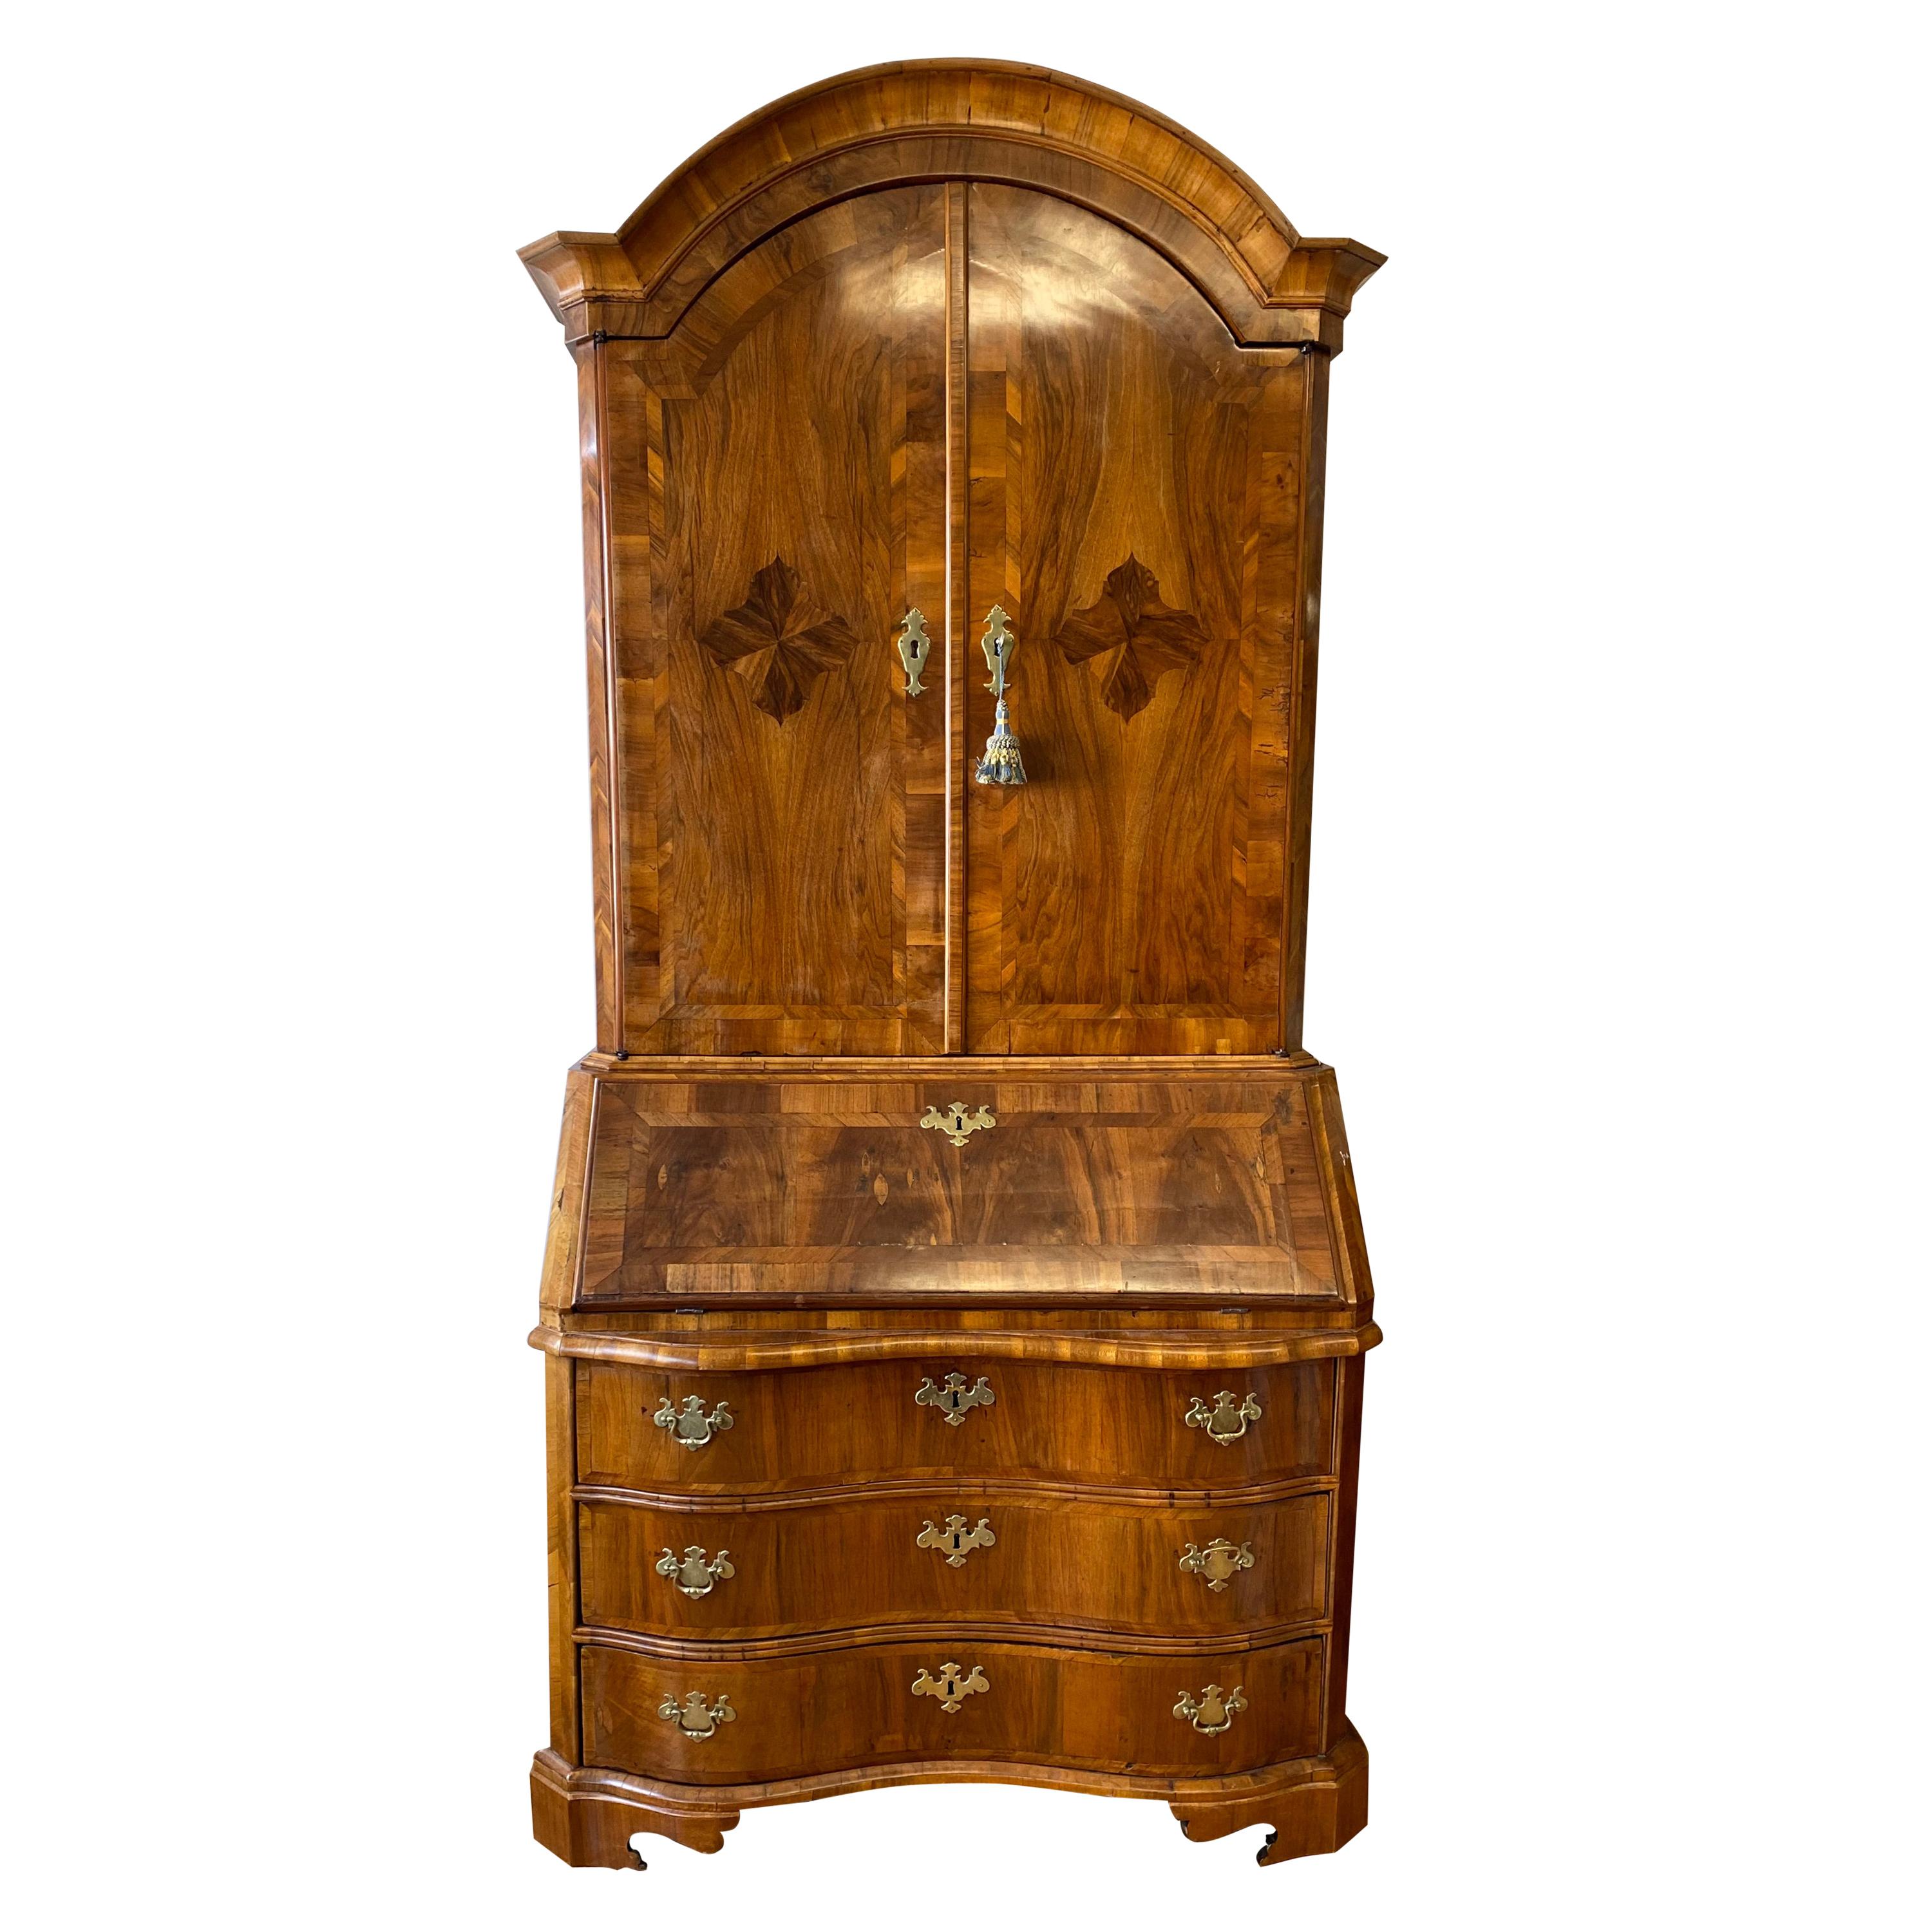 18th Century English Walnut and Secretary with Drop Front Desk